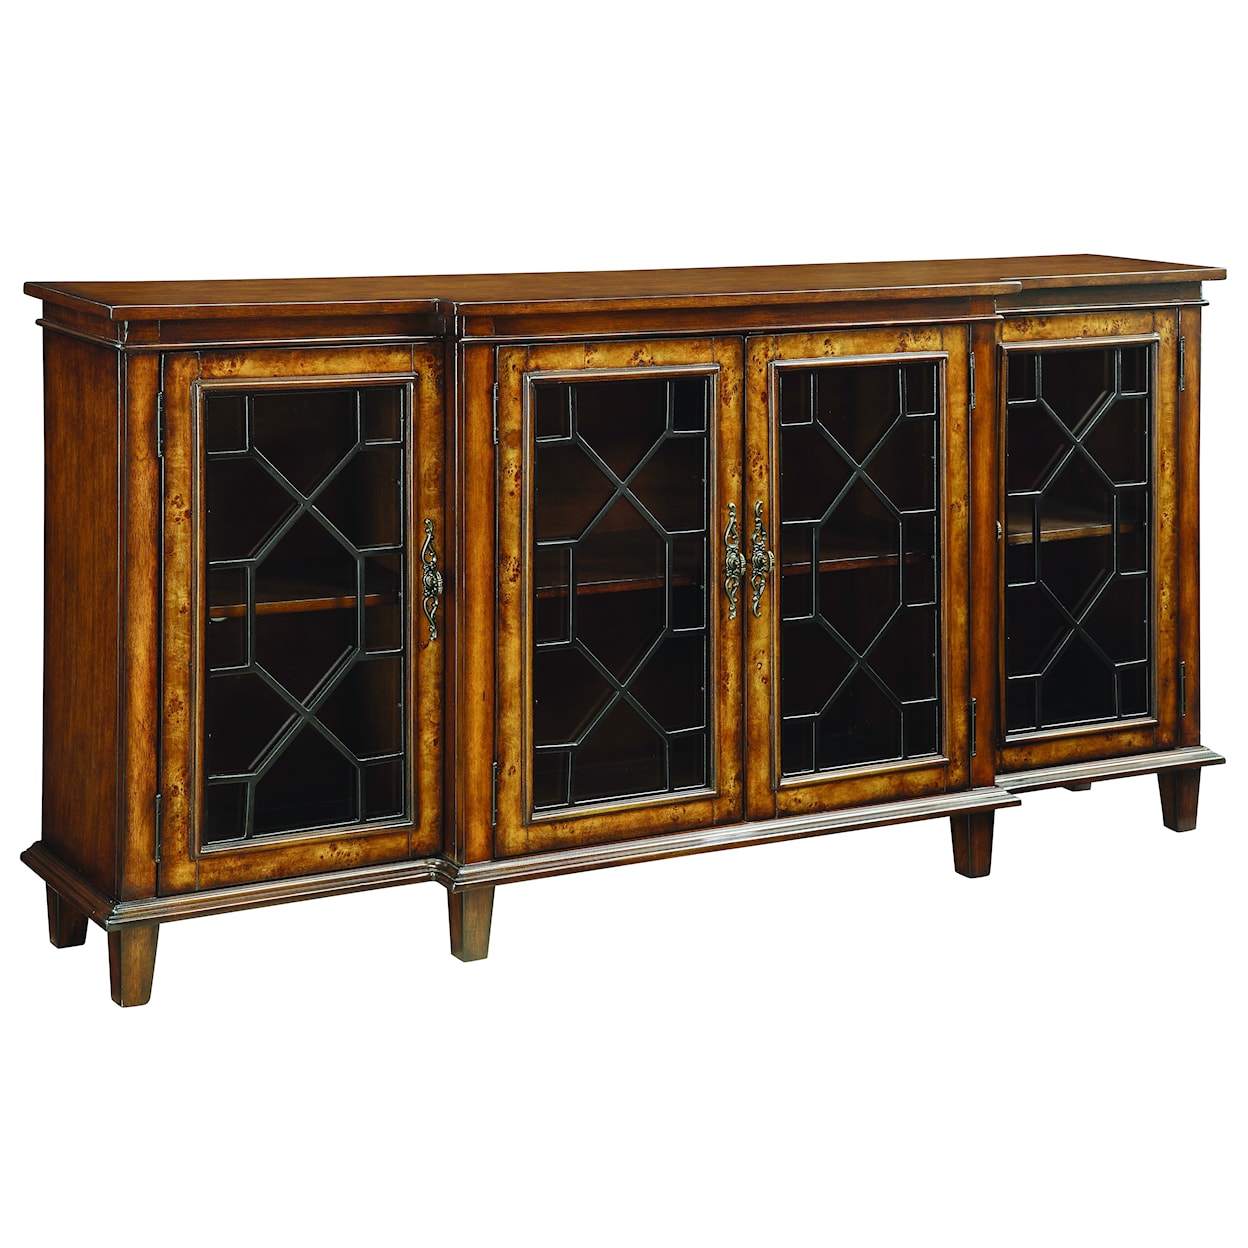 Coast2Coast Home Accents by Andy Stein Four Door Credenza